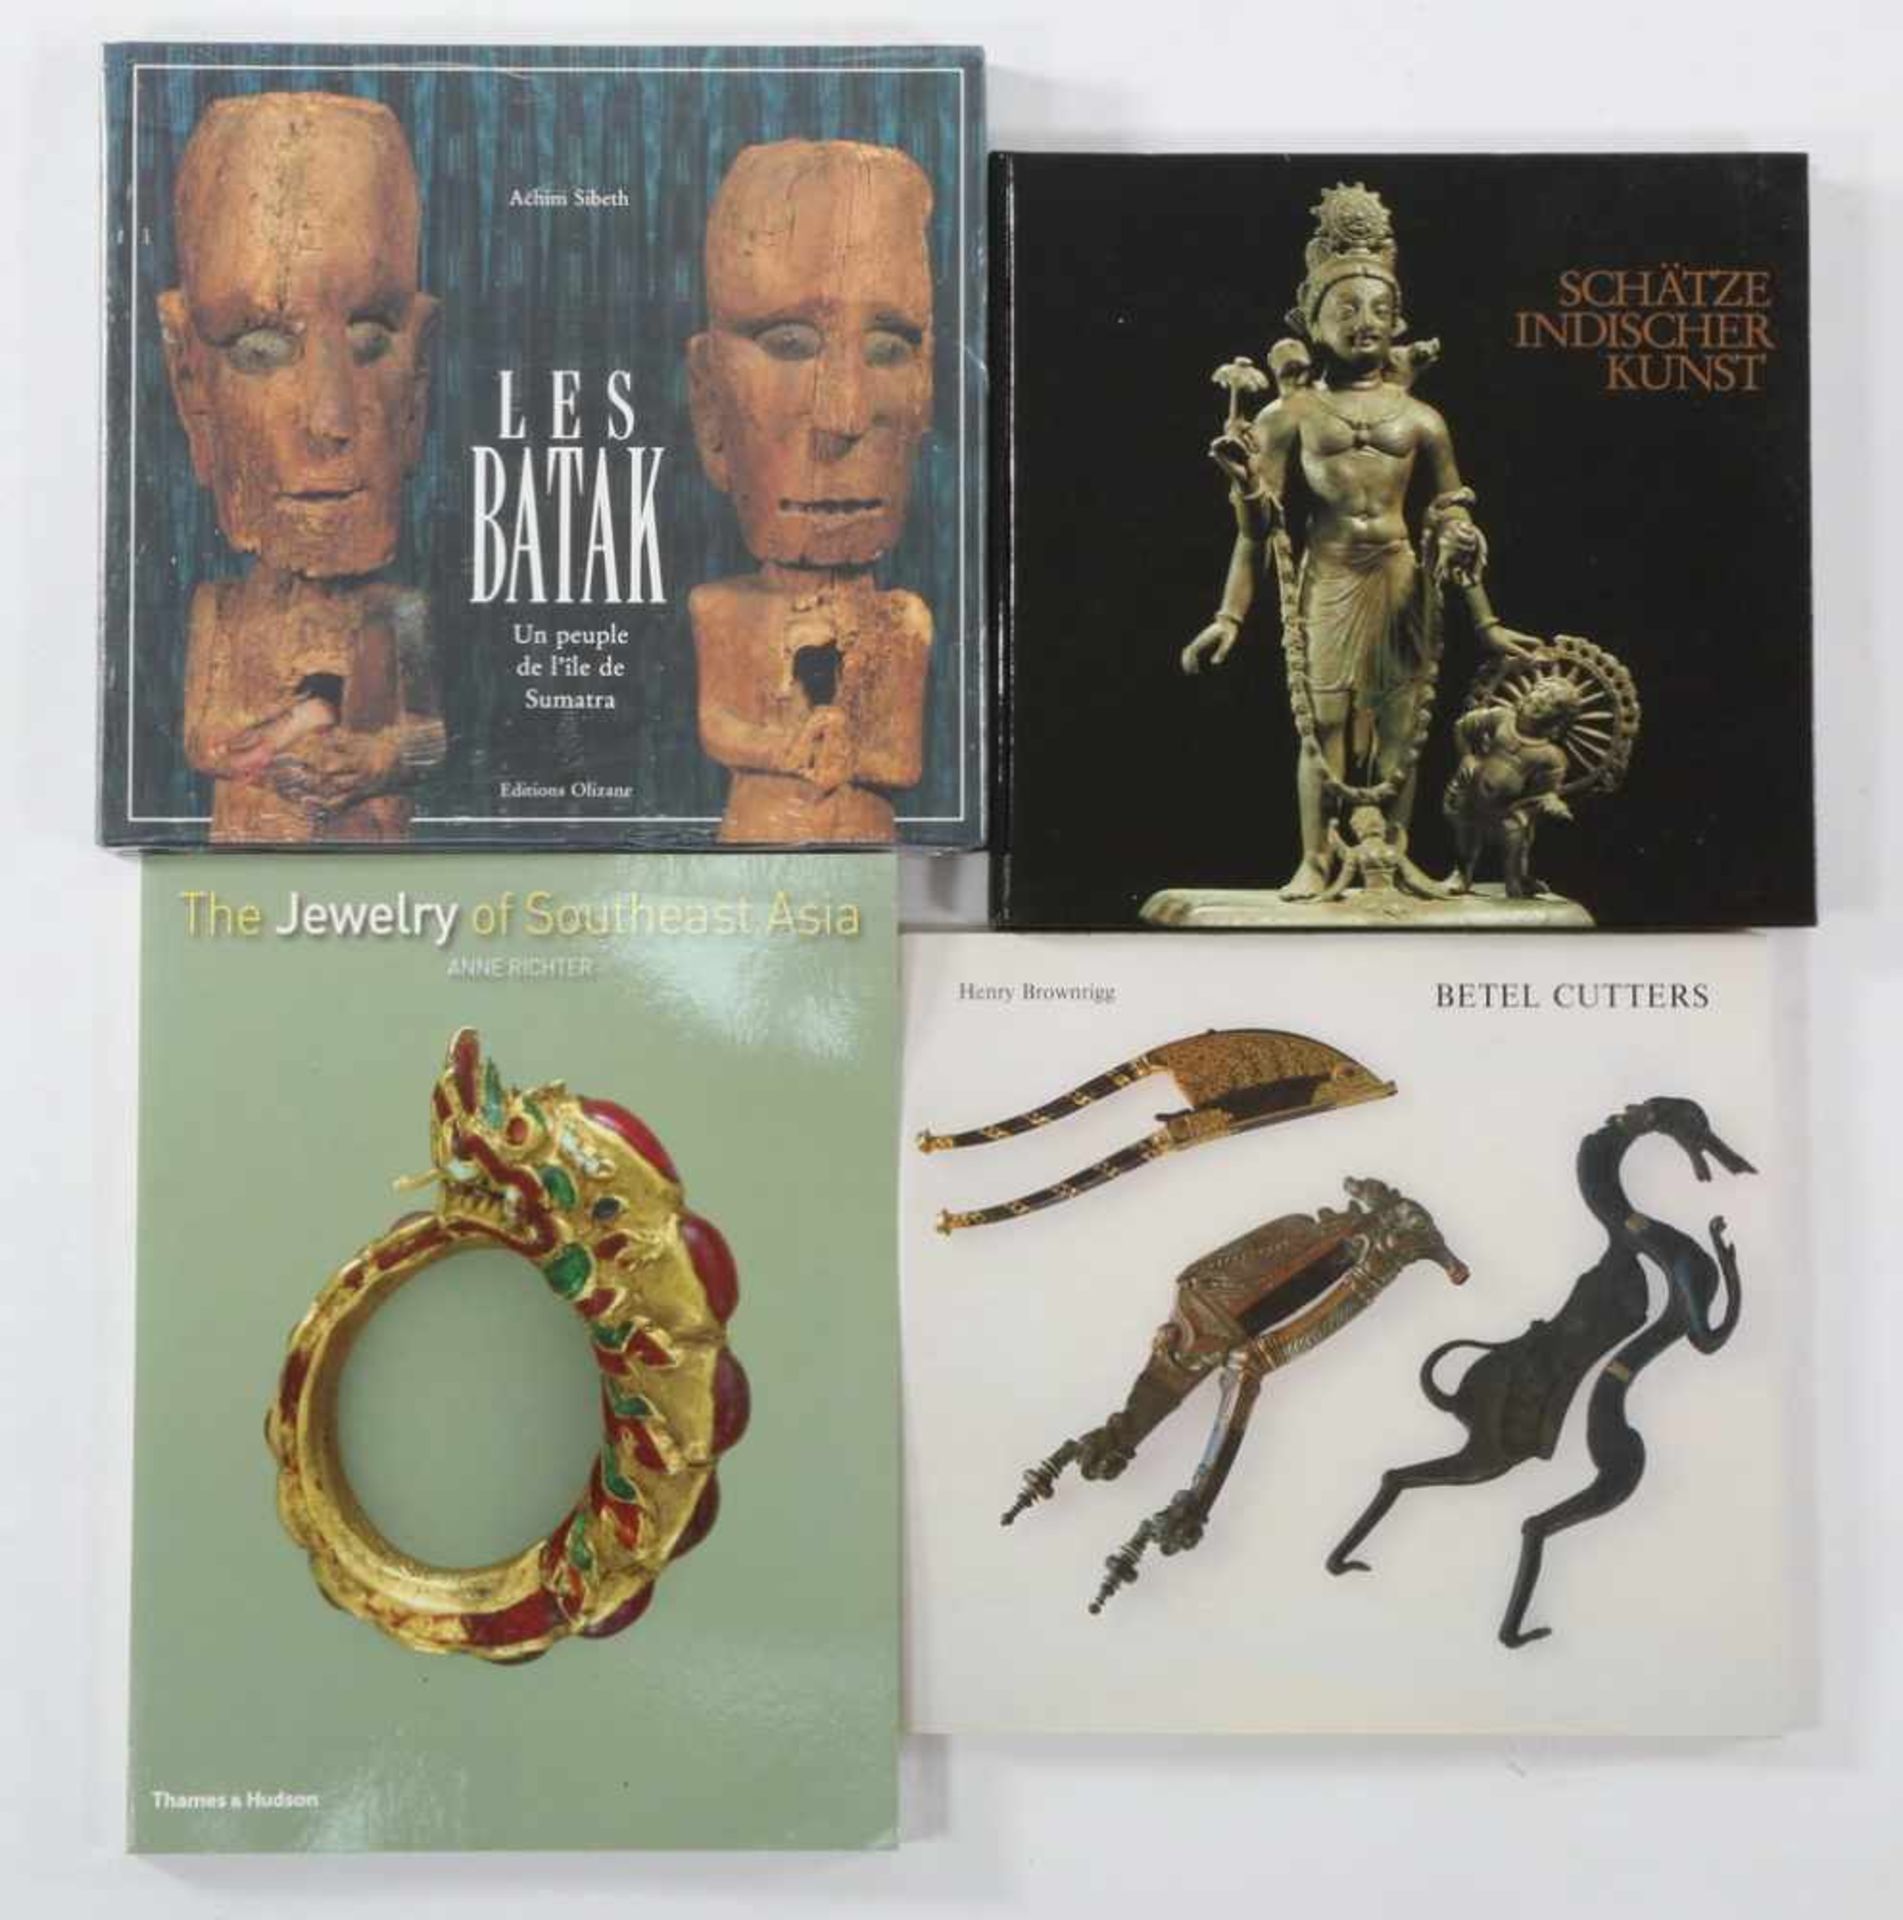 Collection of books: Sibeth, Les Bataks, 1990, H. Brownrigg on Betel Cutters, 1991The Jewelry of